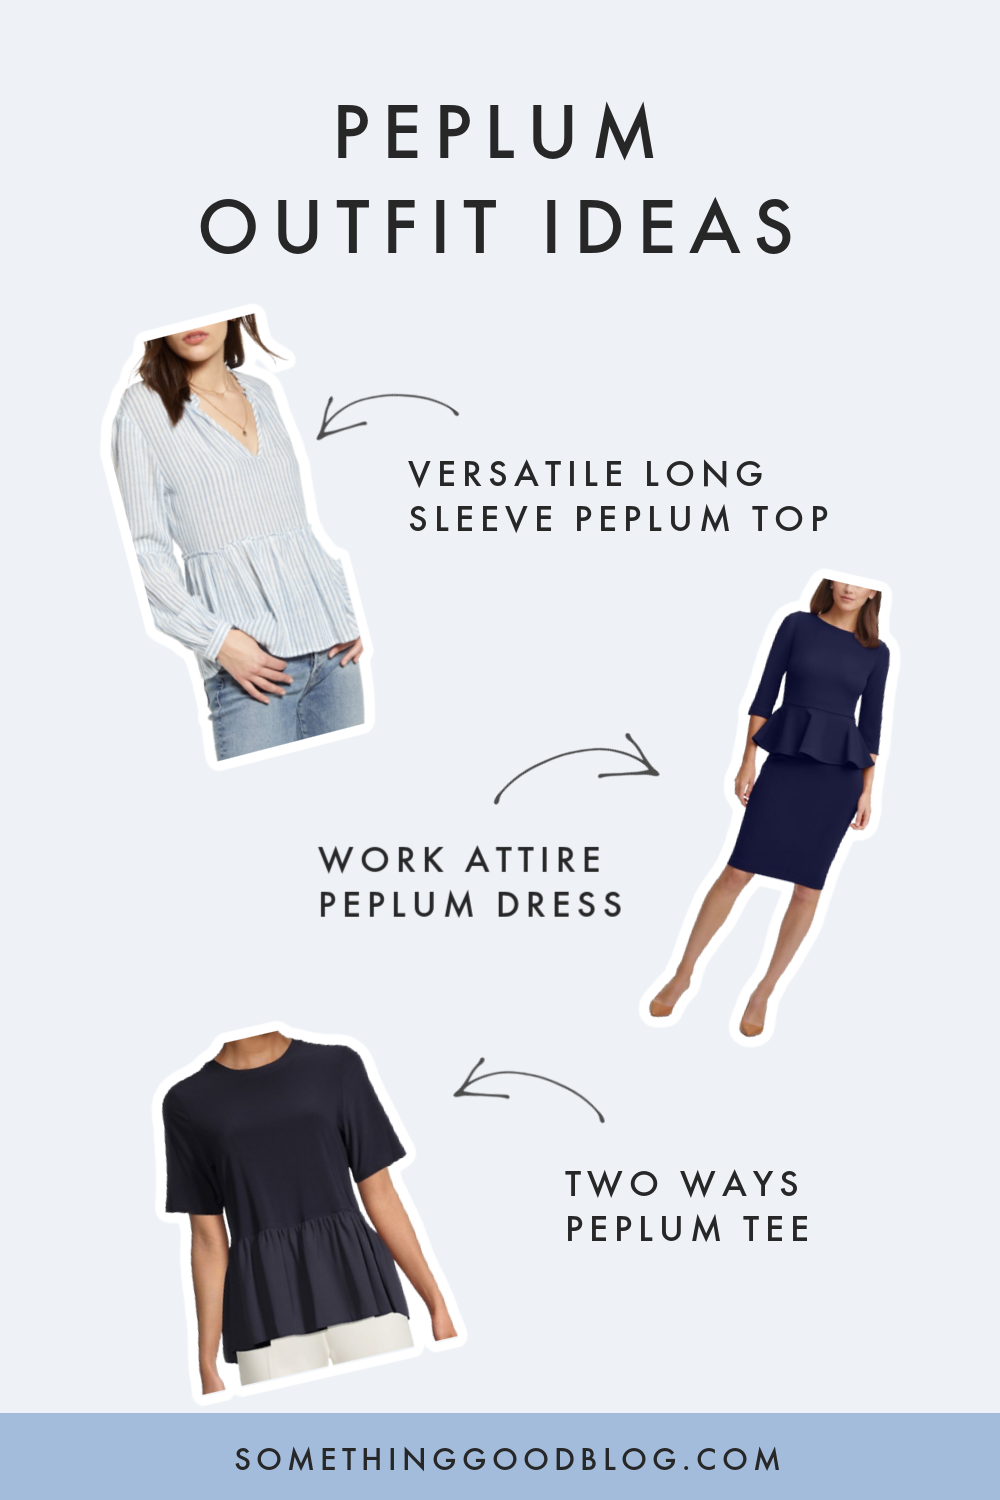 How to wear Peplum and Outfit Ideas